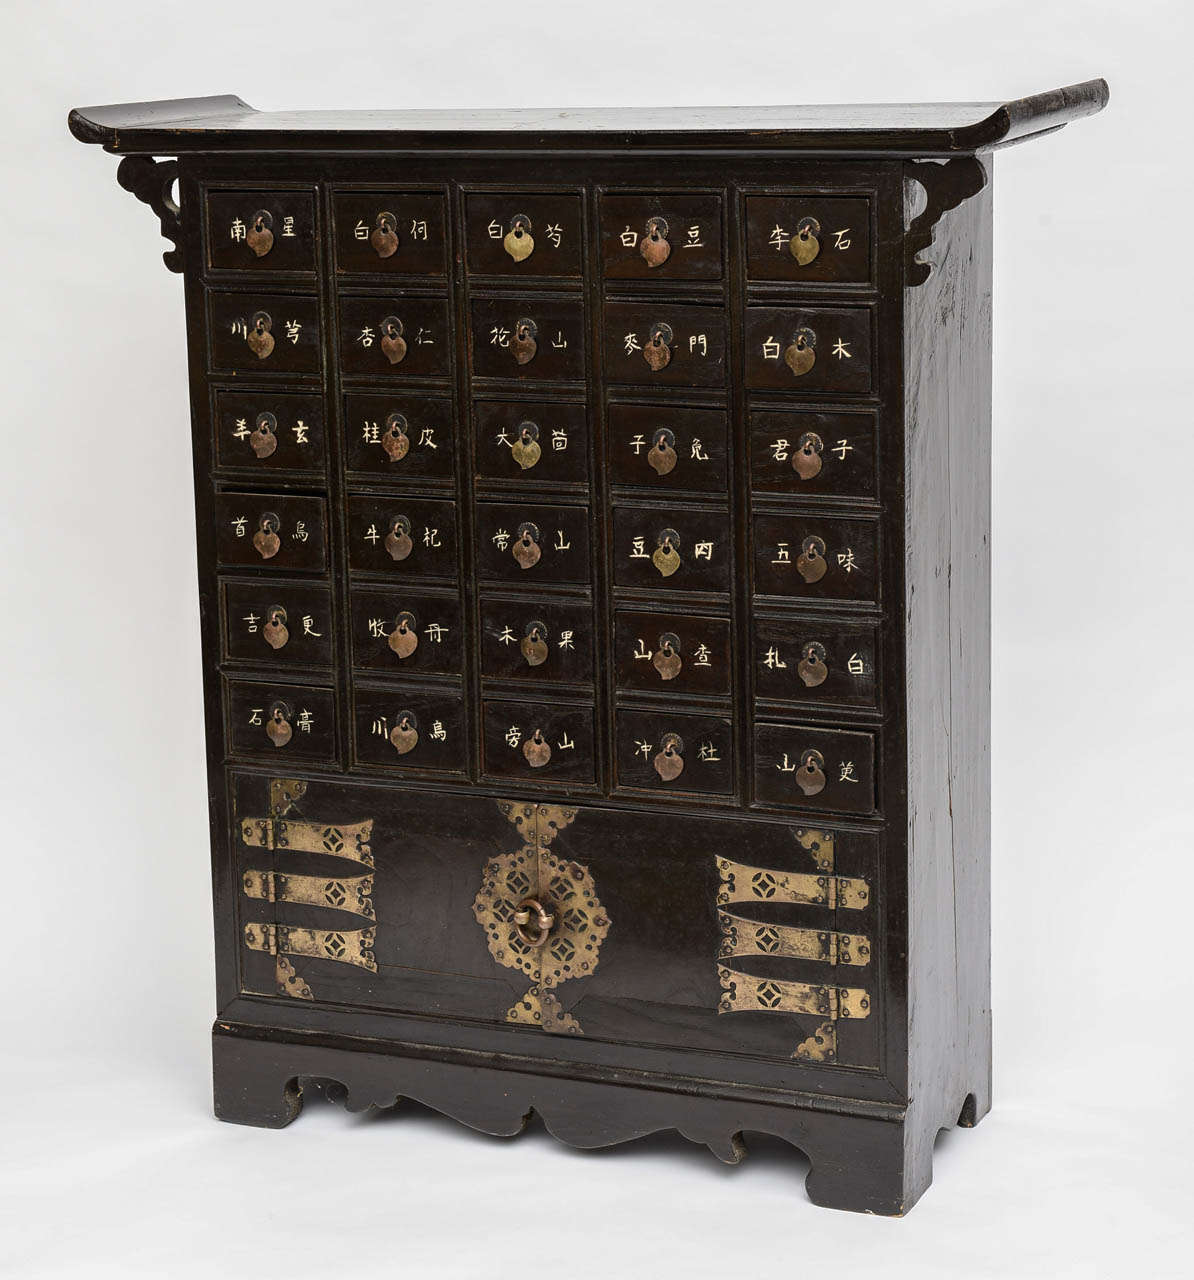 Chinese Apothecary chest 29” x 27” x 8 ¾”, 30 drawer, 2 doors